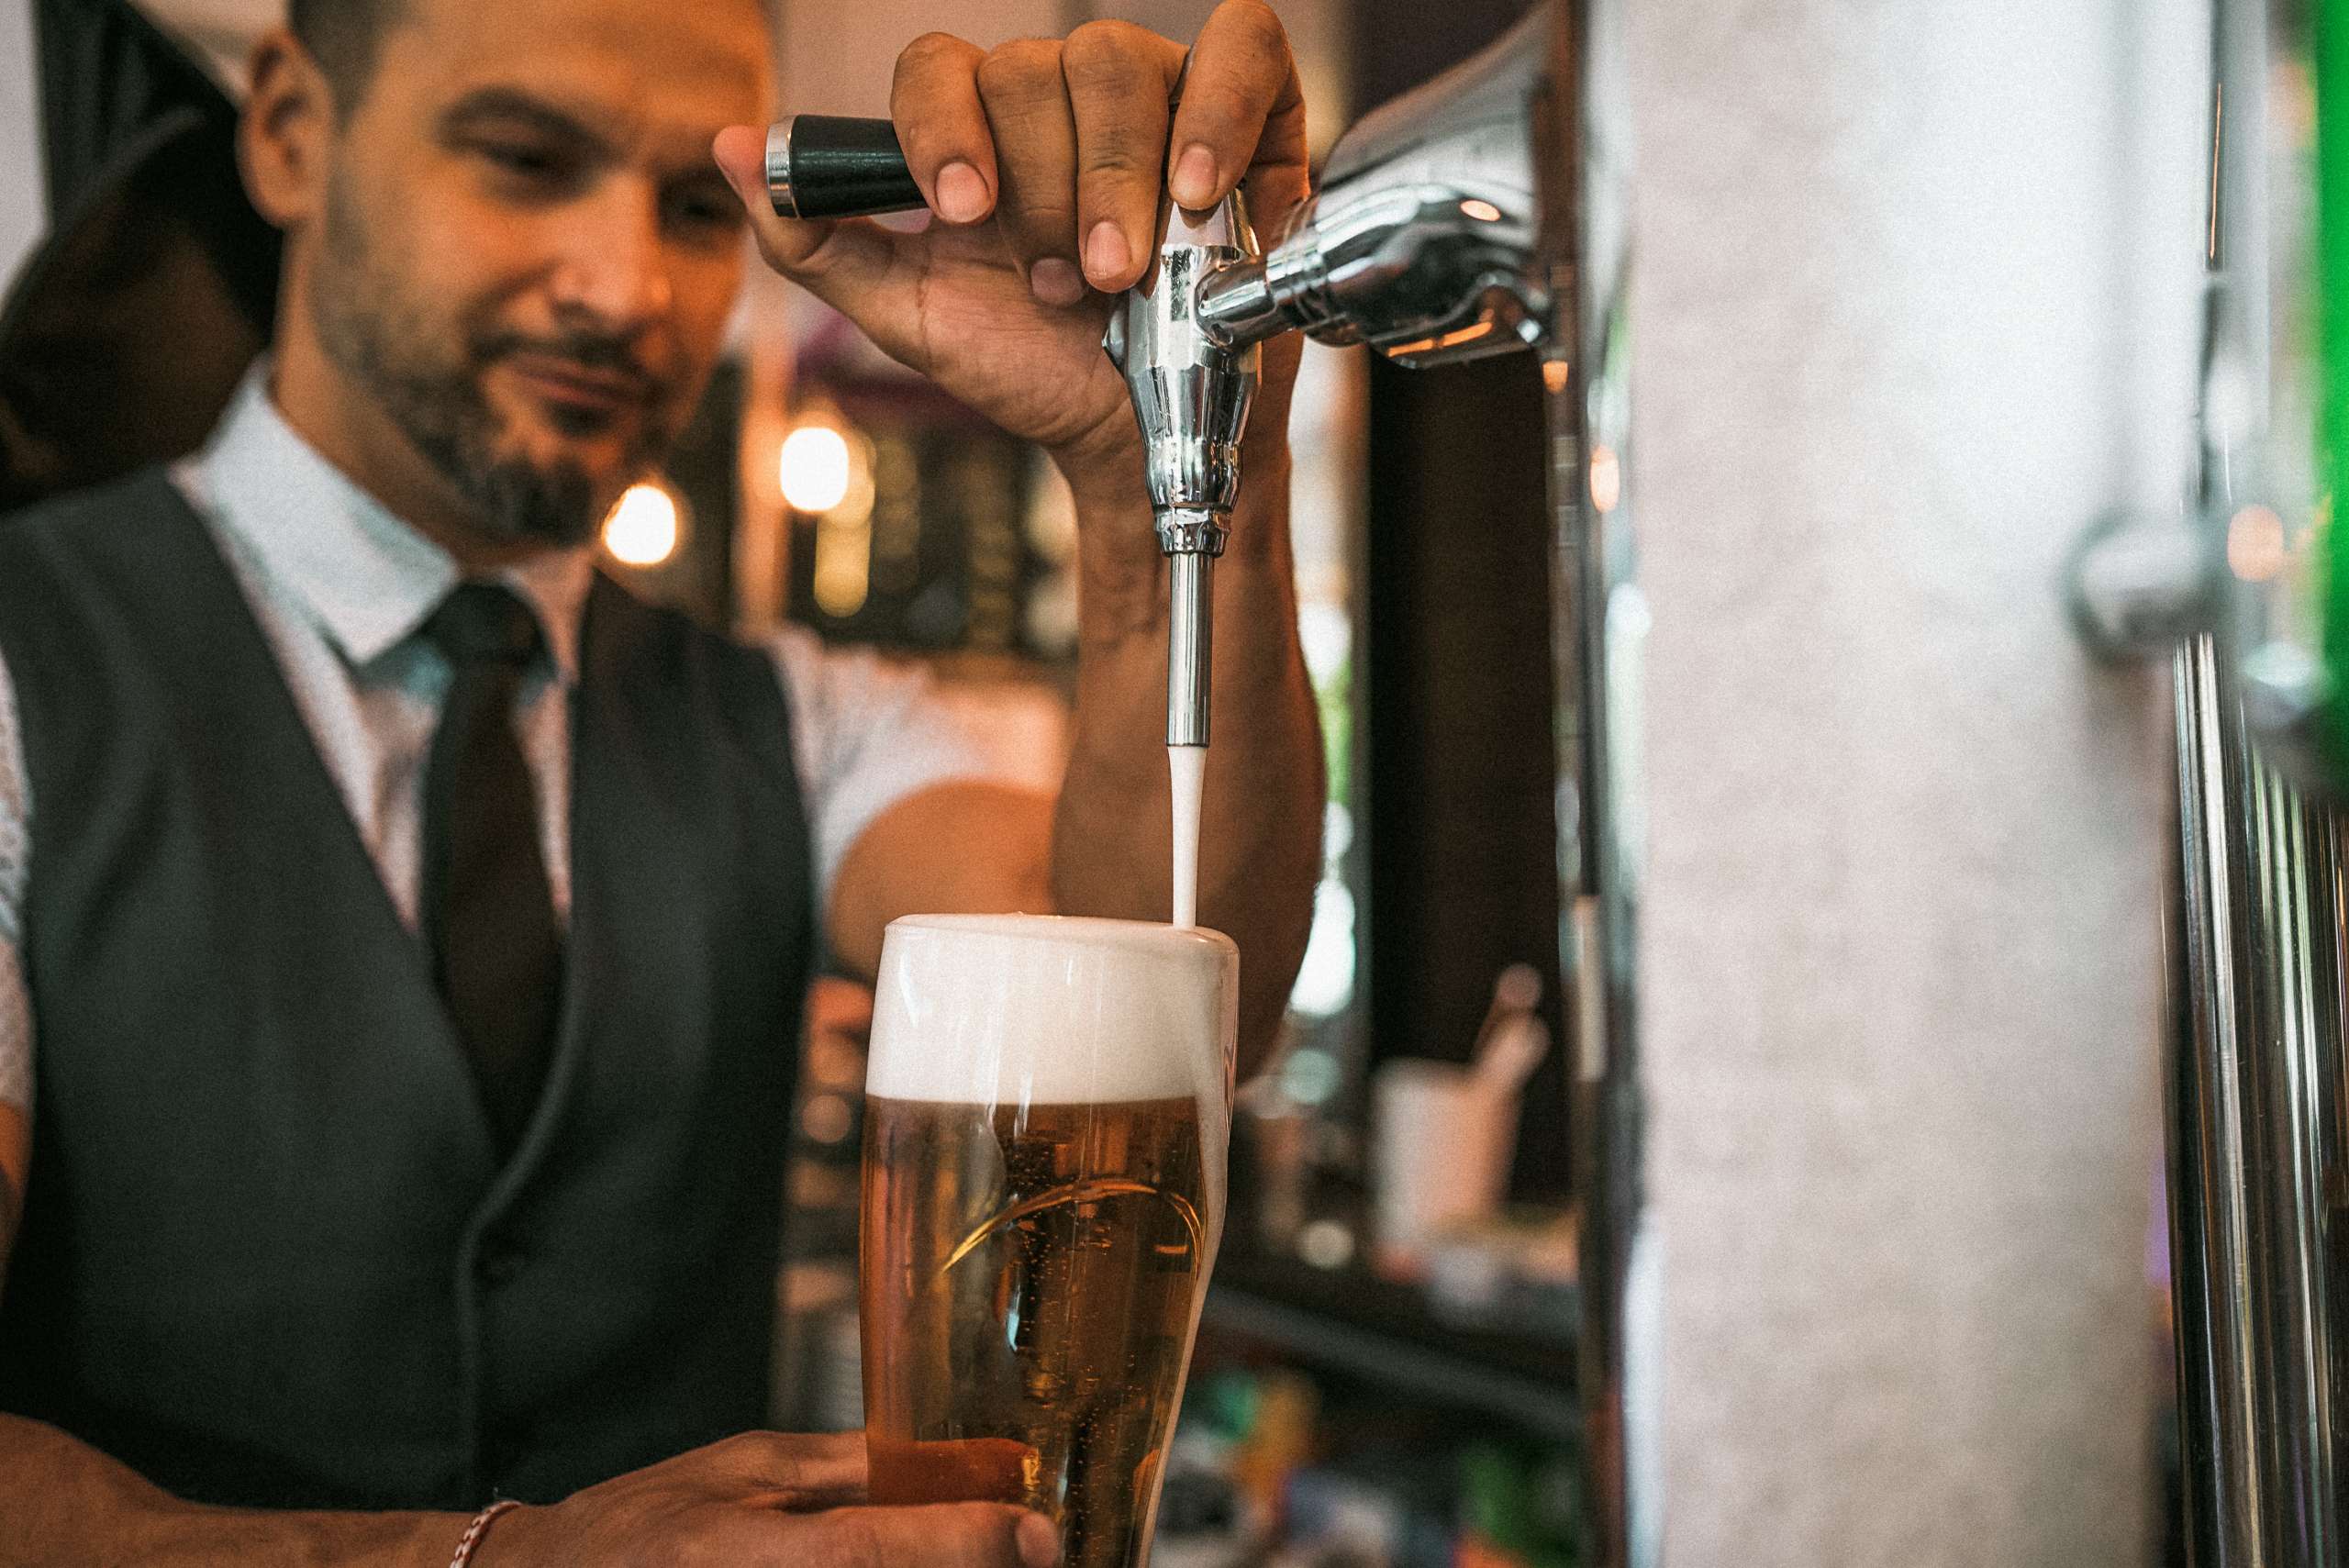 Barman hand at beer tap pouring a draught lager beer serving in a pub.